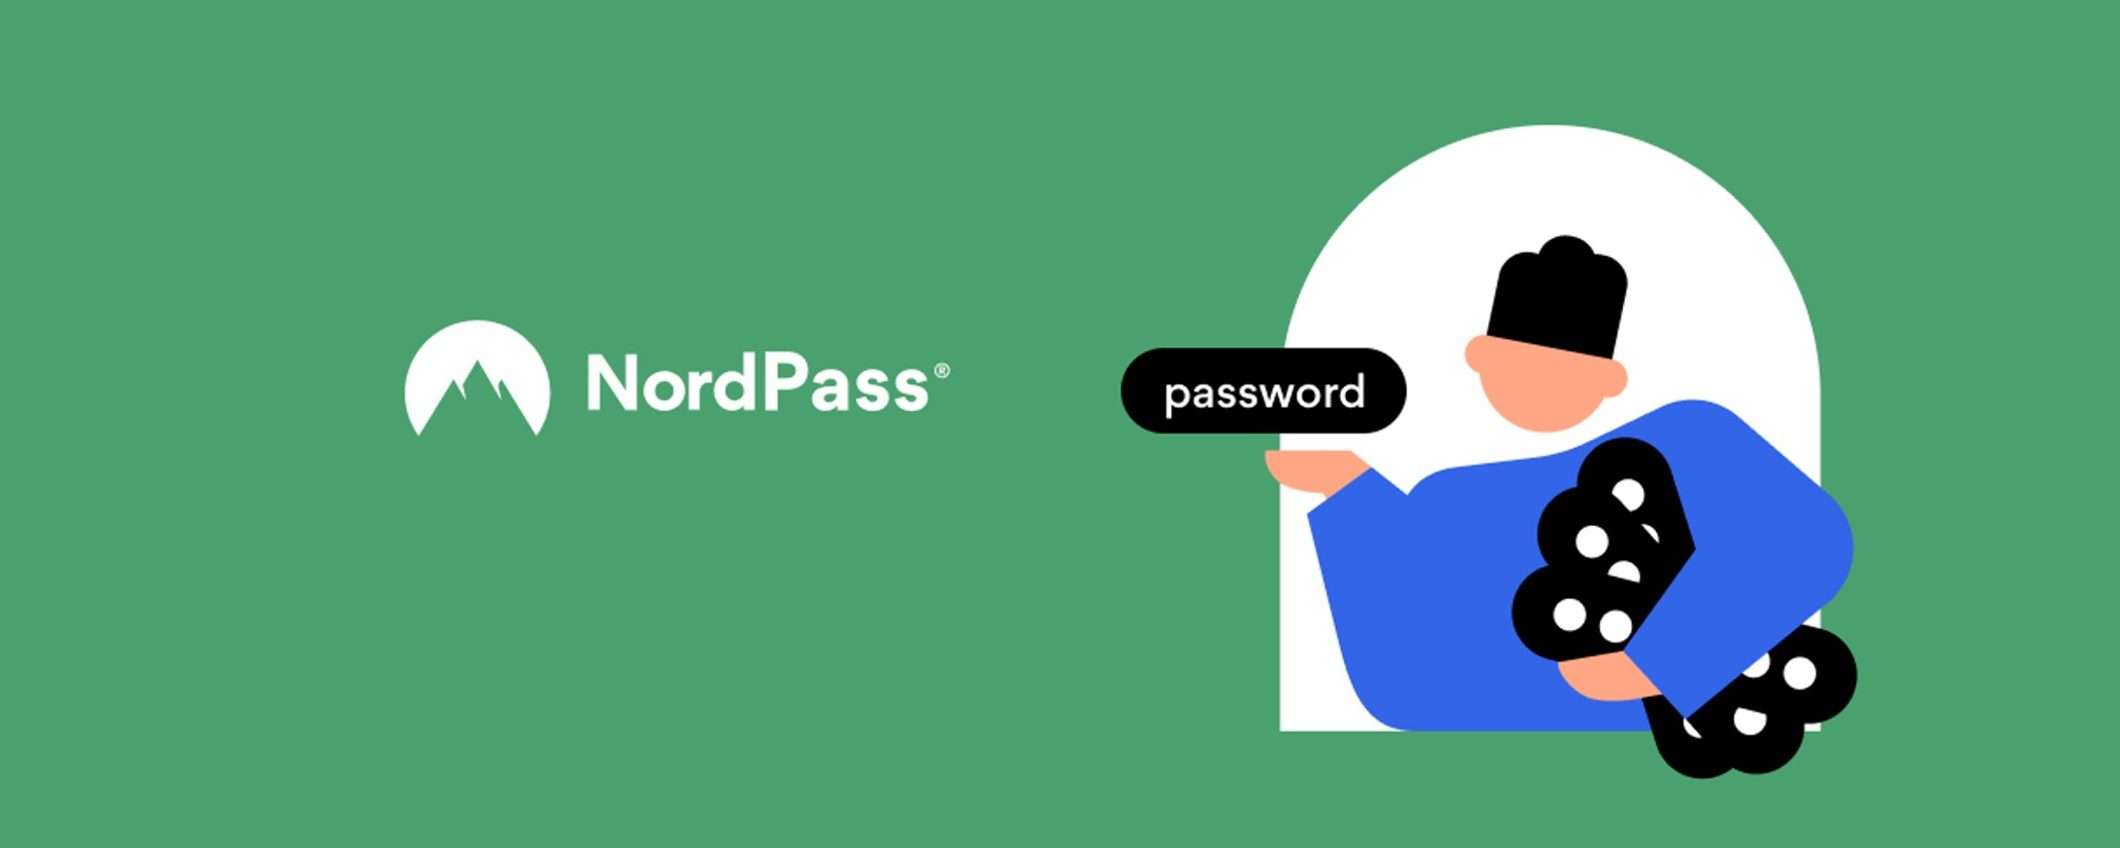 NordPass: il password manager sicuro ed efficace